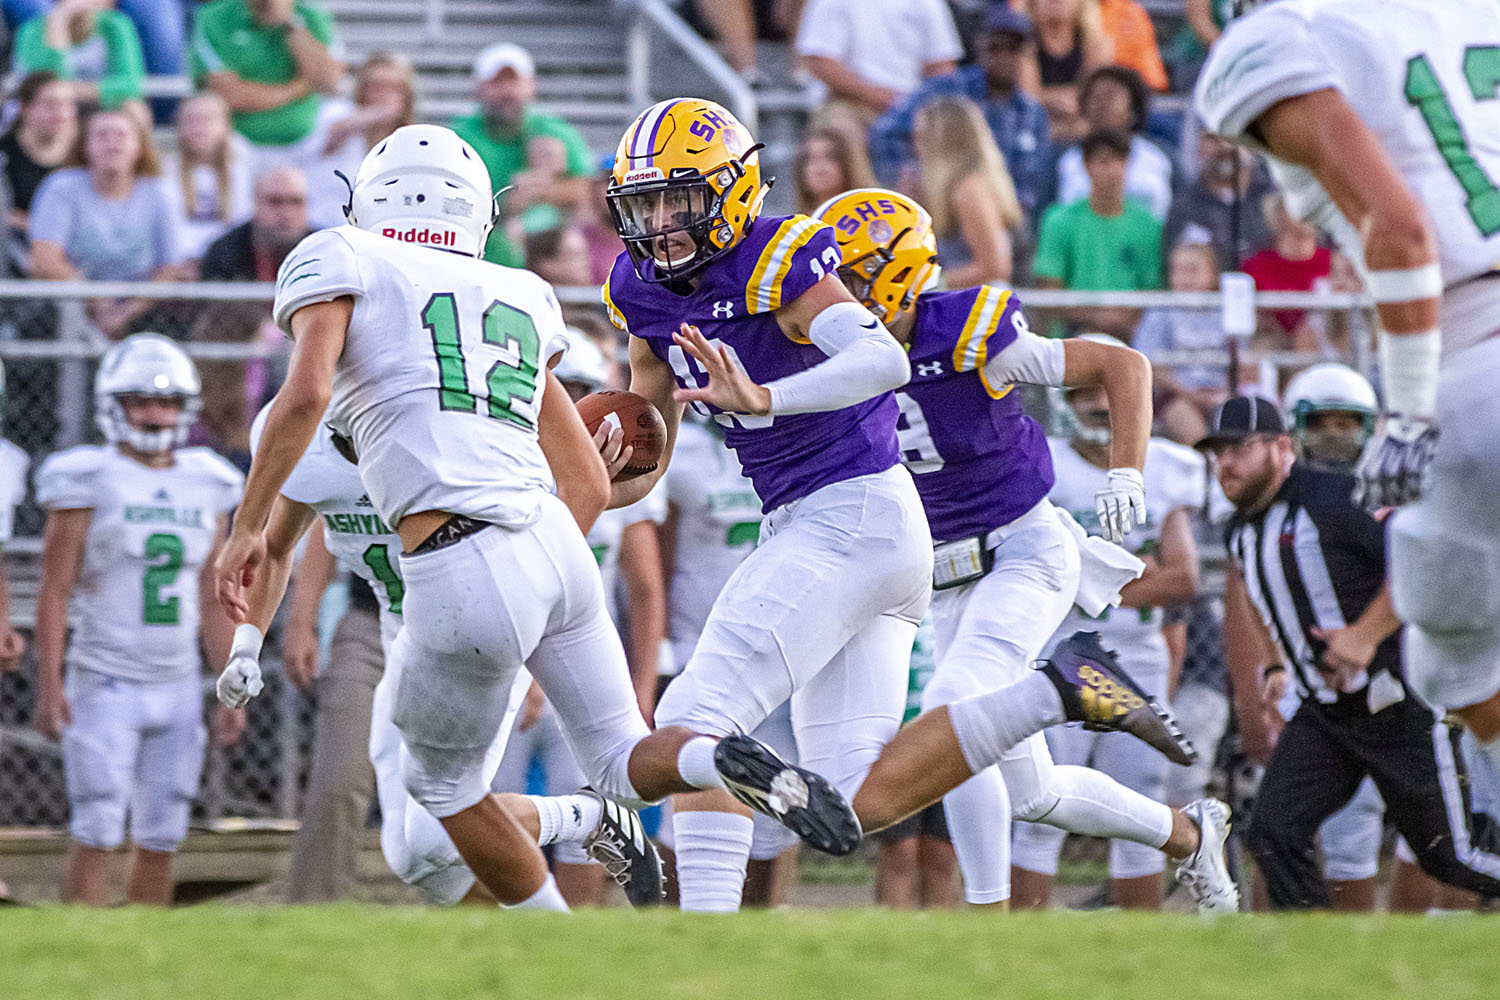 Springville travels to Central Clay County, looks to avoid slipping further back in Class 5A